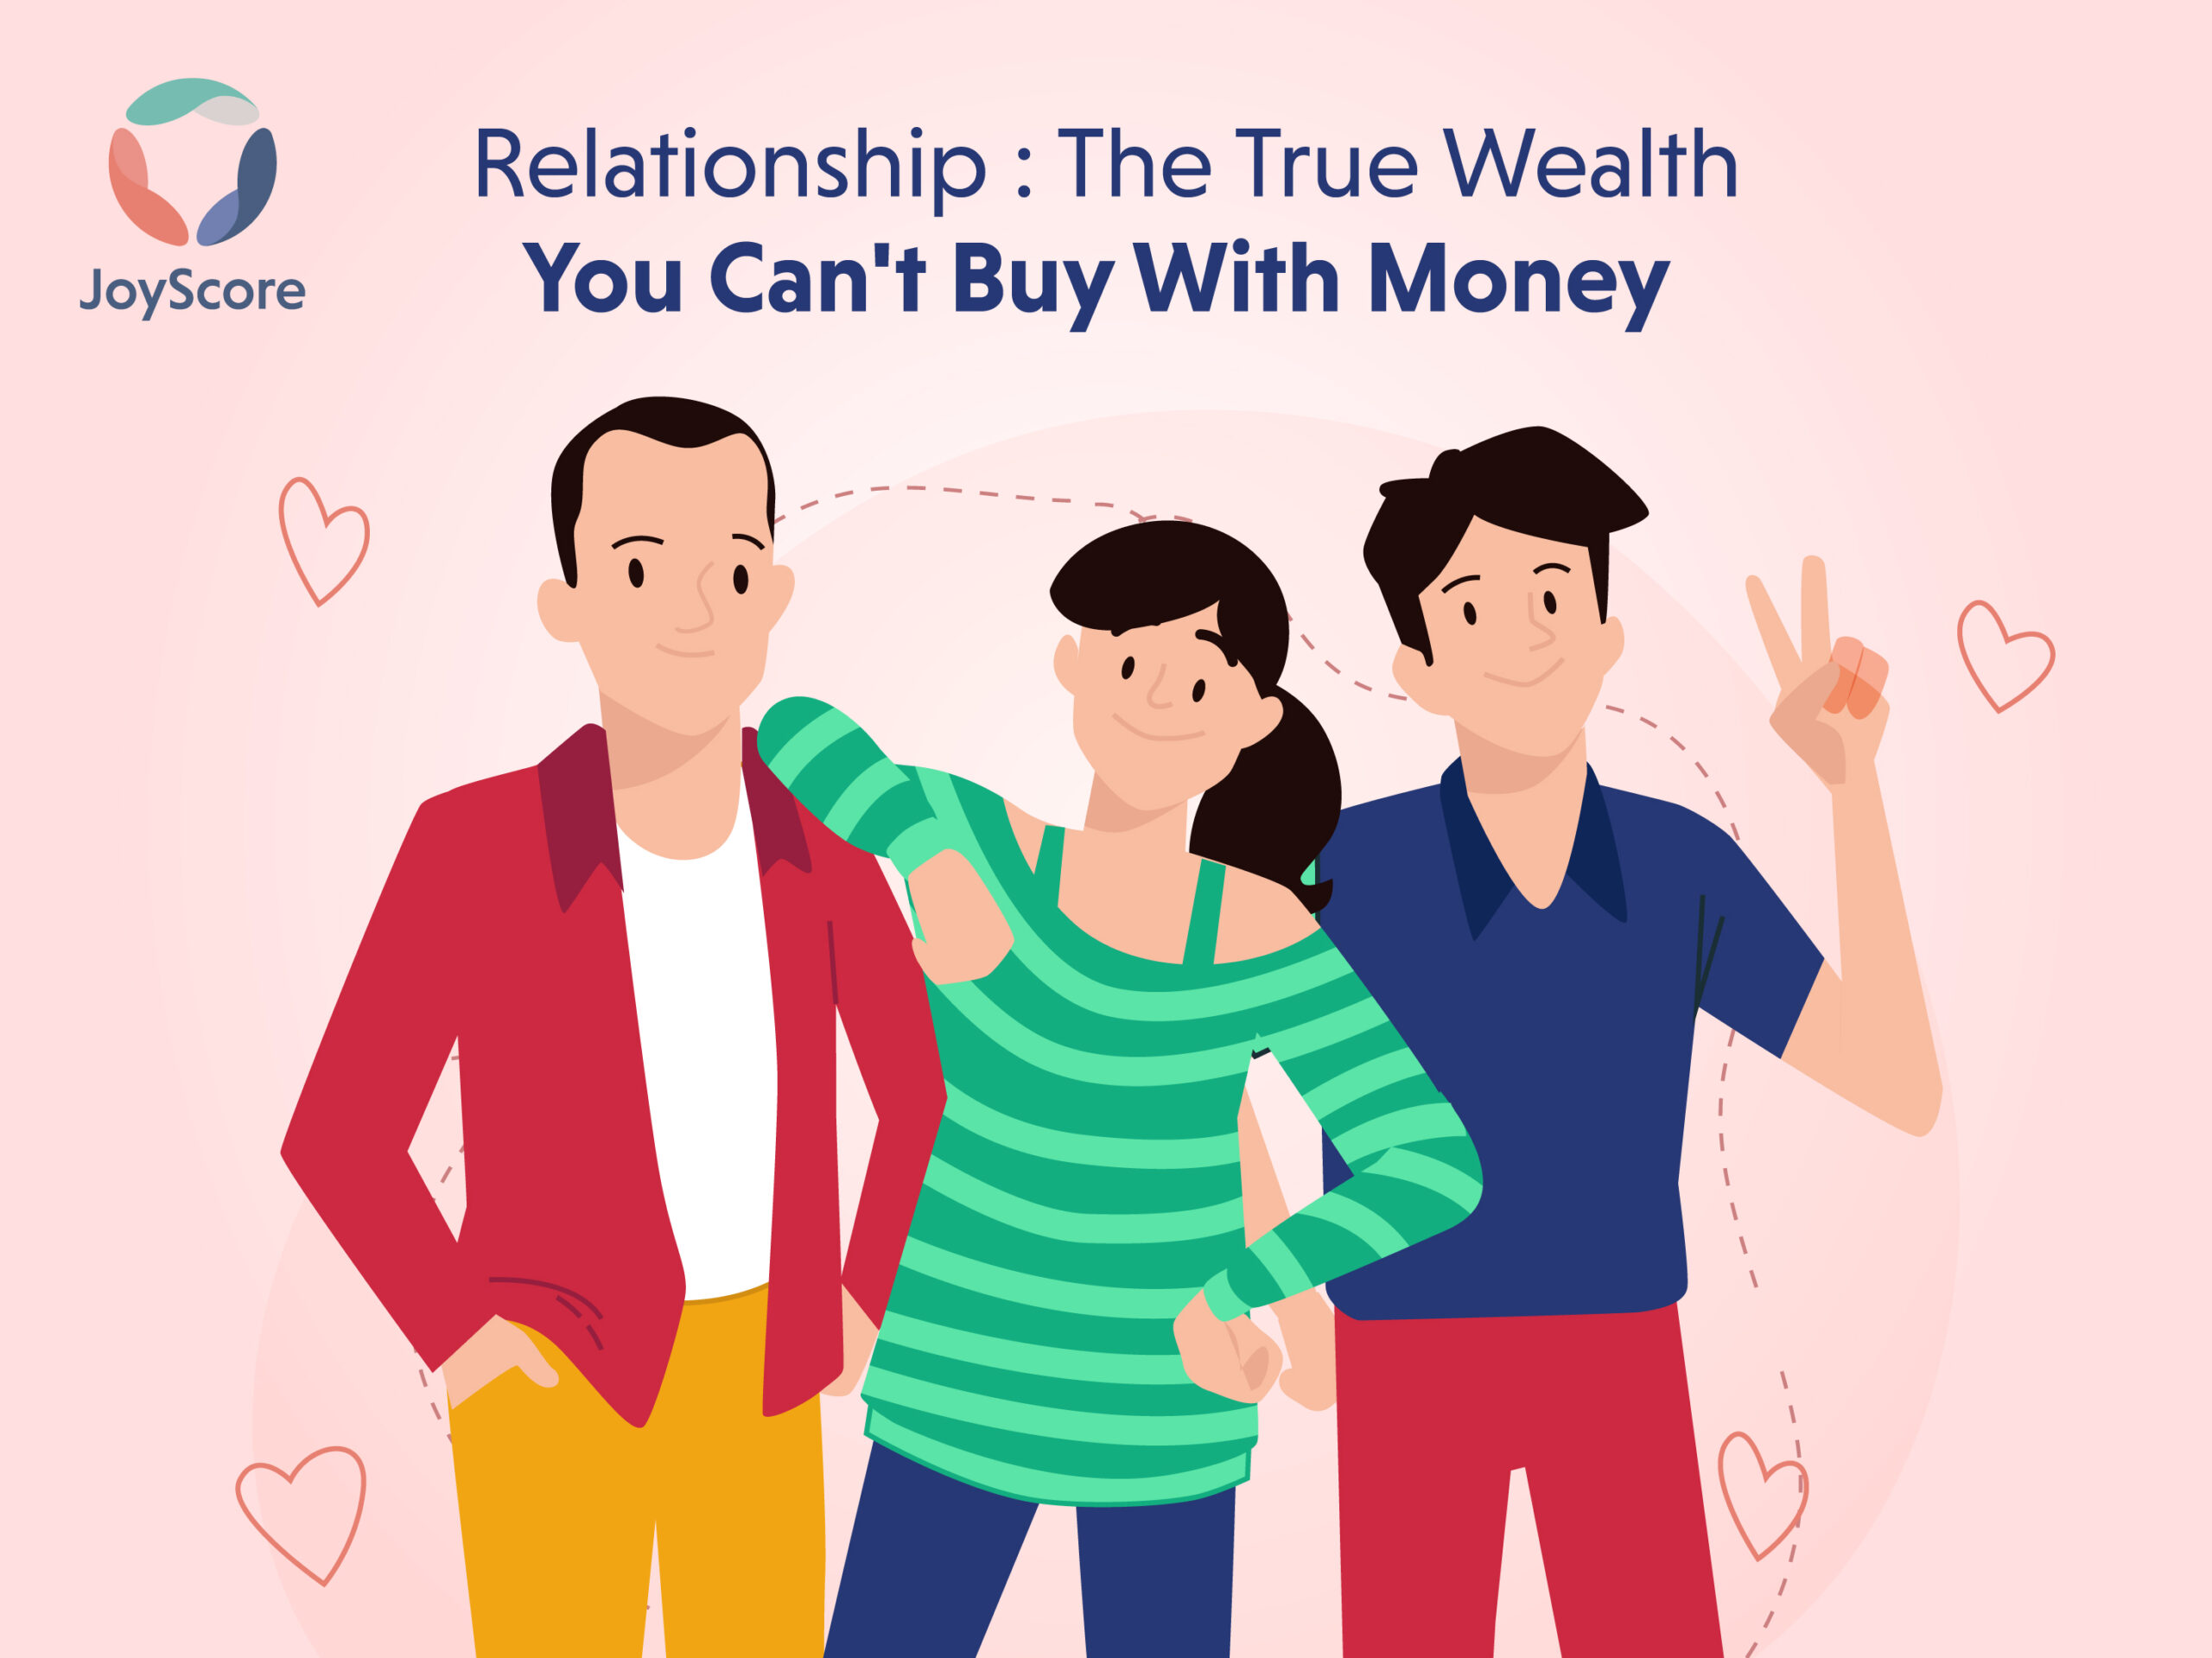 The True Wealth You Can’t Buy With Money: Relationship